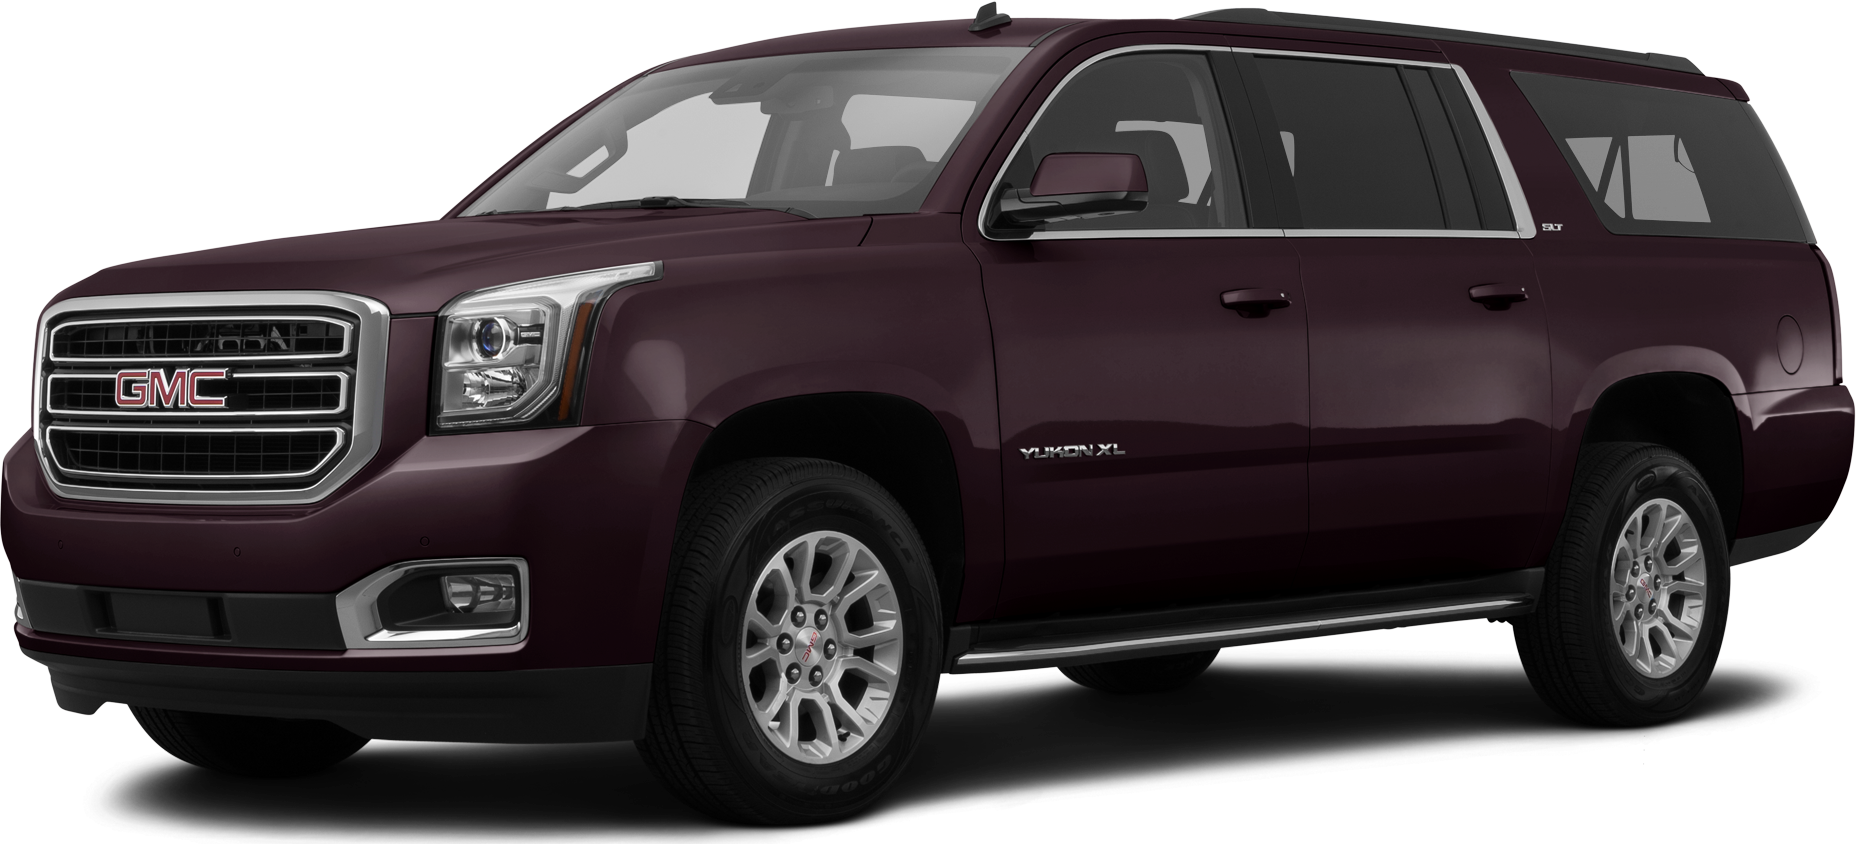 2015 Gmc Yukon Xl Price Value Ratings And Reviews Kelley Blue Book 6466